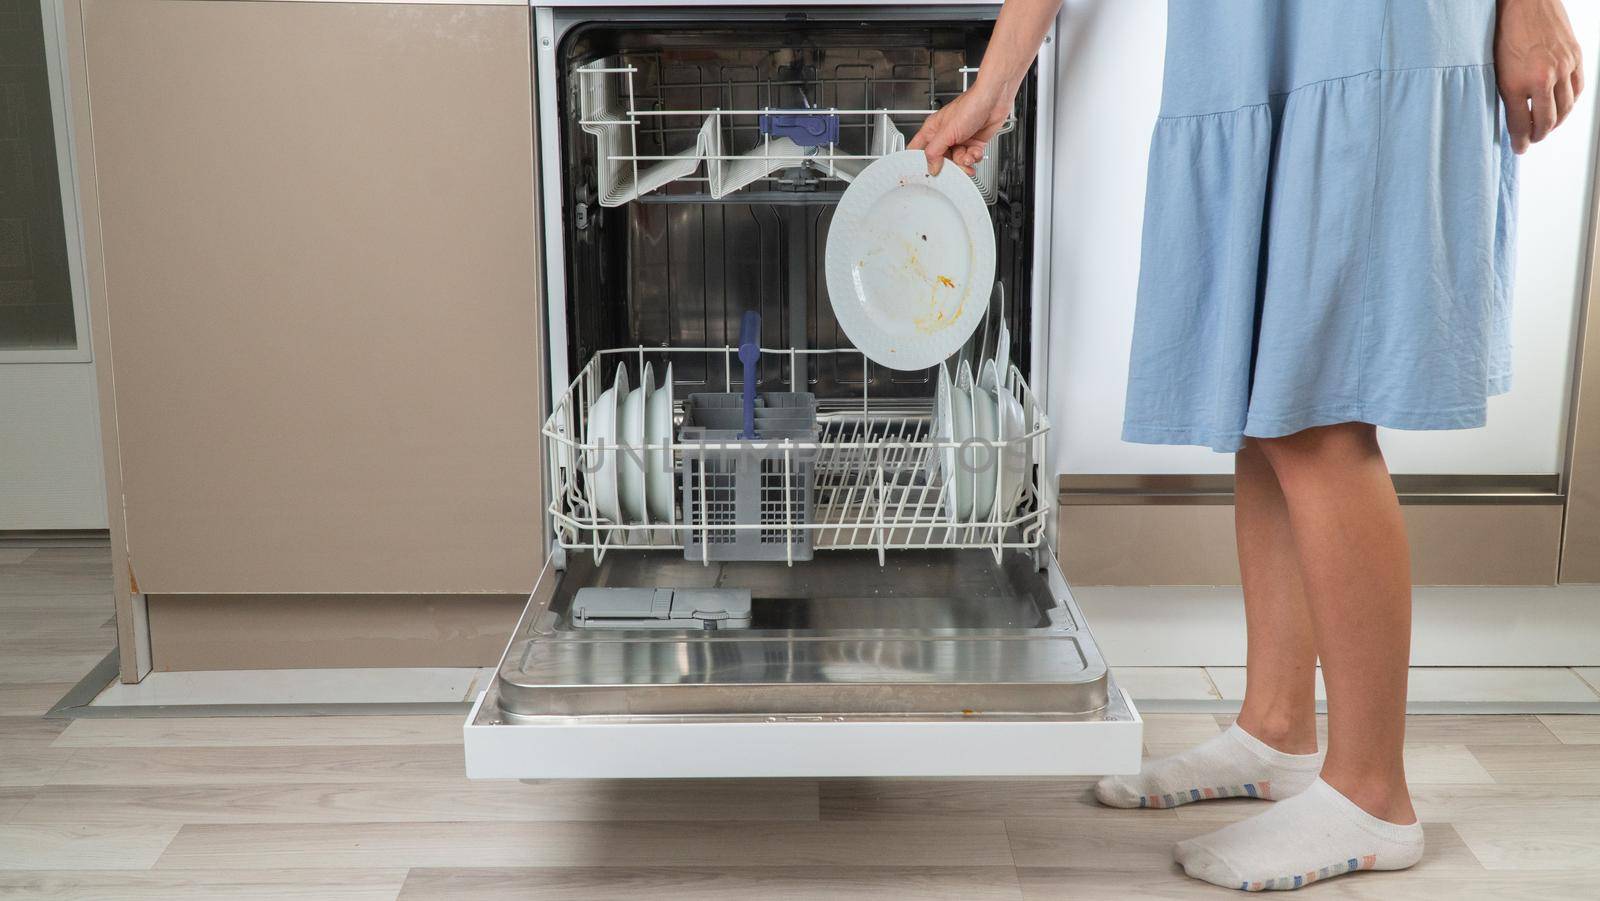 A woman's hand puts a dirty plate in the dishwasher by voktybre